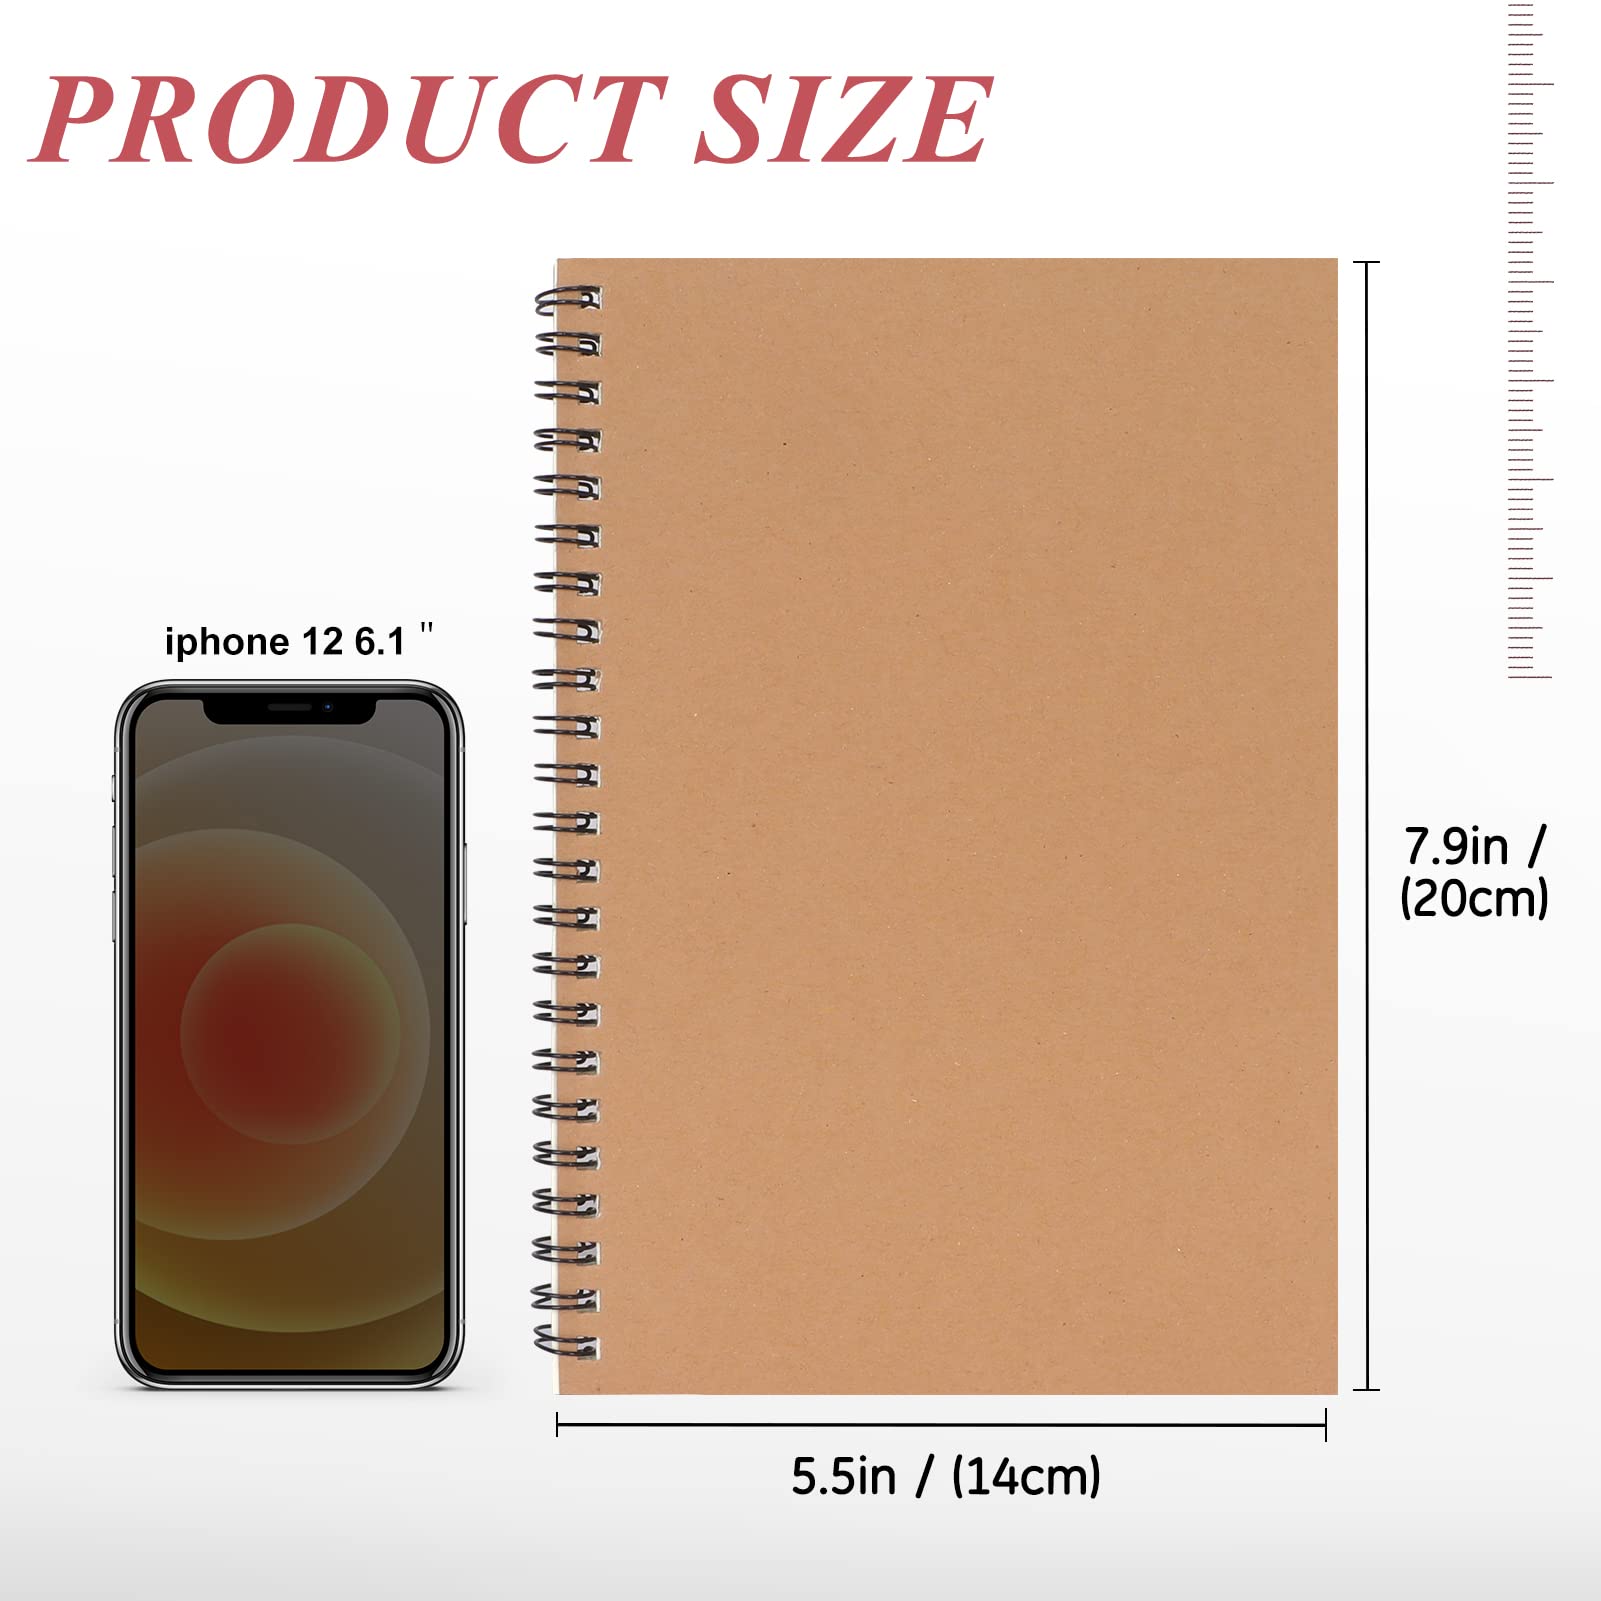 A5 Spiral Notebook,4 Pack Kraft Cover Ruled Journals Notebooks 20 x 14 cm Lined Journal Notebook 58 Sheets / 116 Pages for Student Office School Supplies Brown